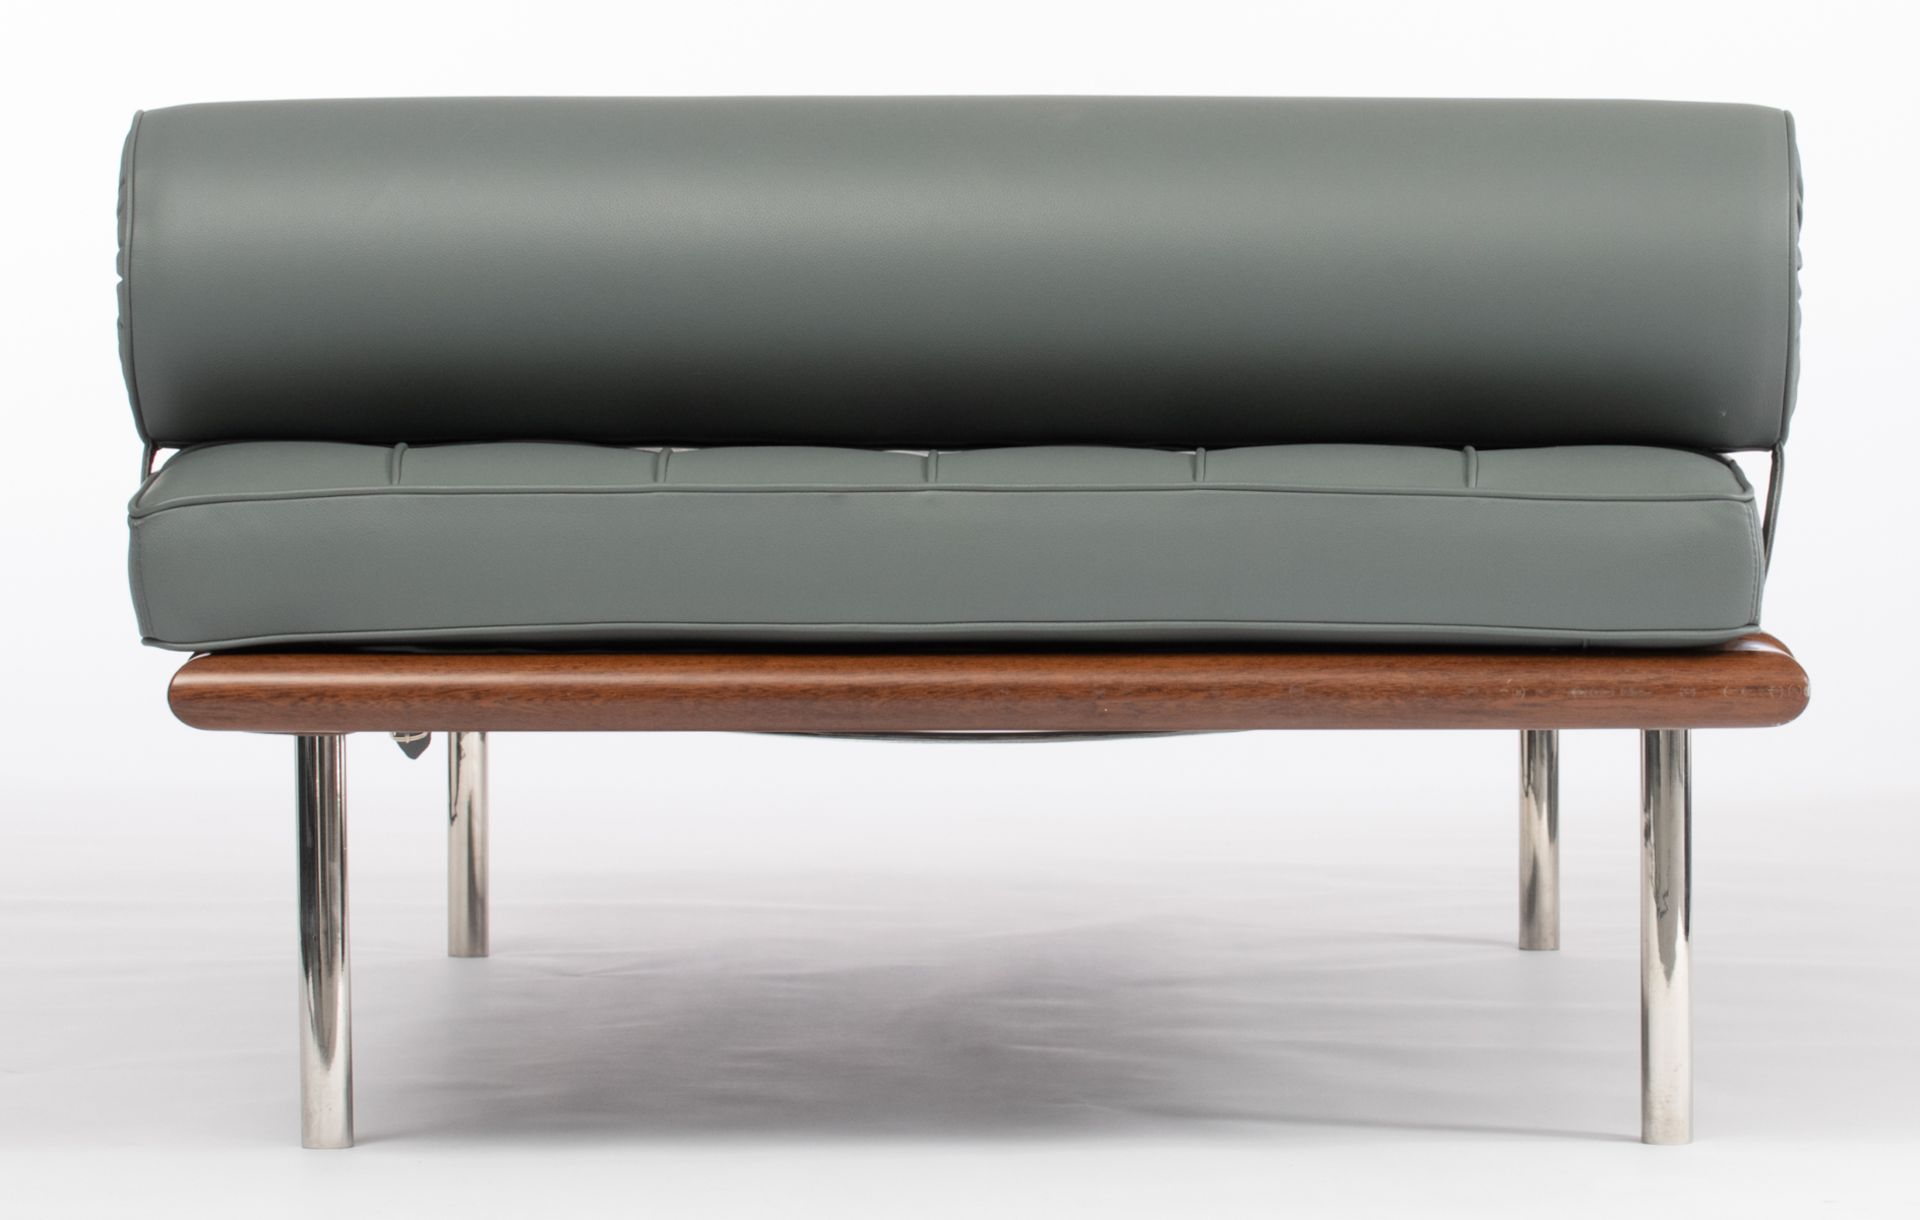 A grey leather upholstered Barcelona daybed, design by Ludwig Mies van der Rohe for Knoll Internatio - Bild 5 aus 10